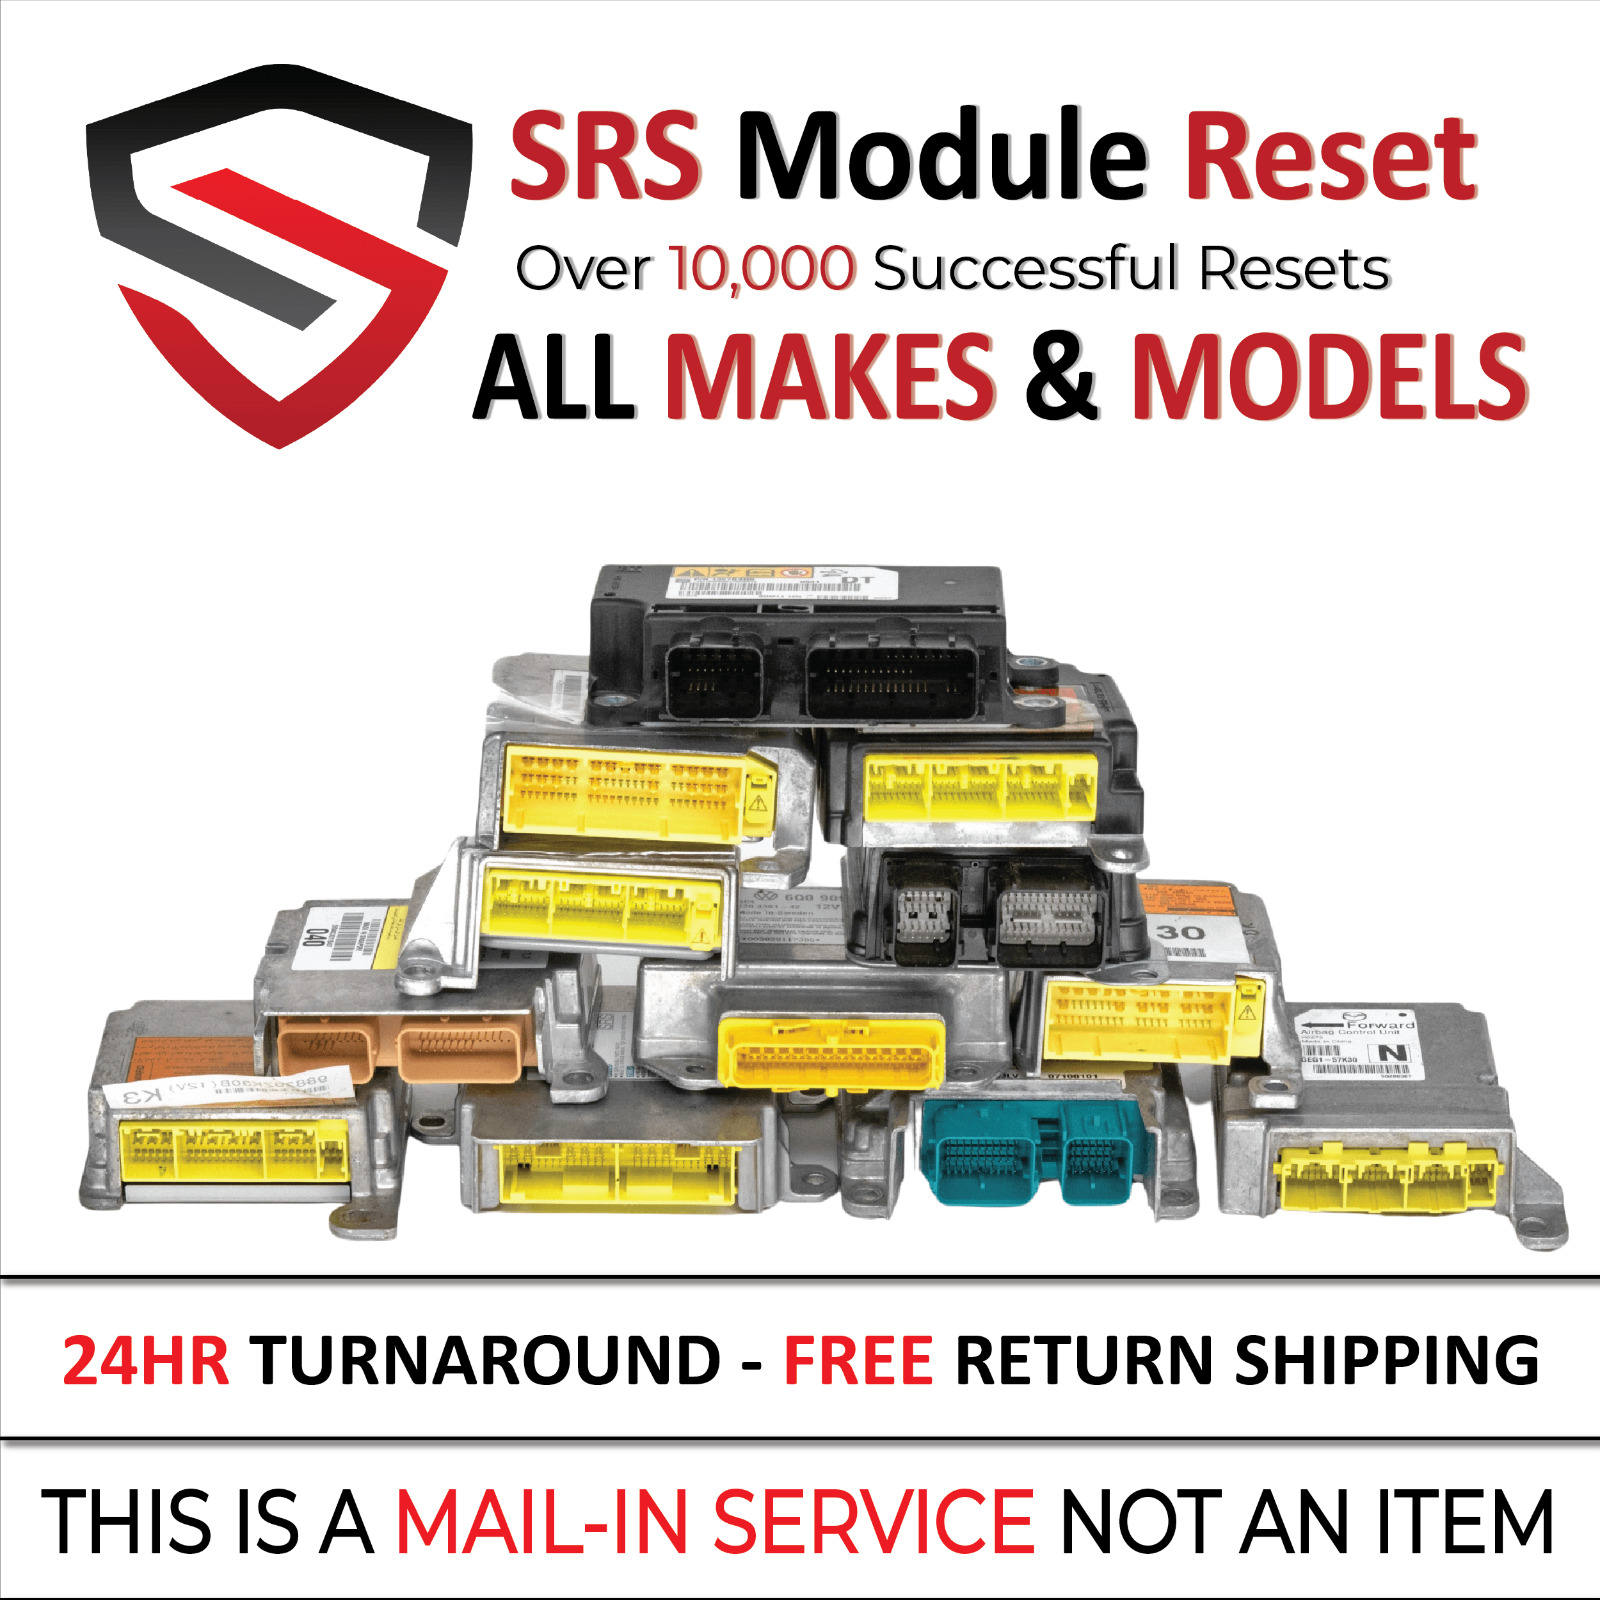 #1 FOR All Cars SRS Module Reset - Satisfaction Guaranteed or Your Money Back